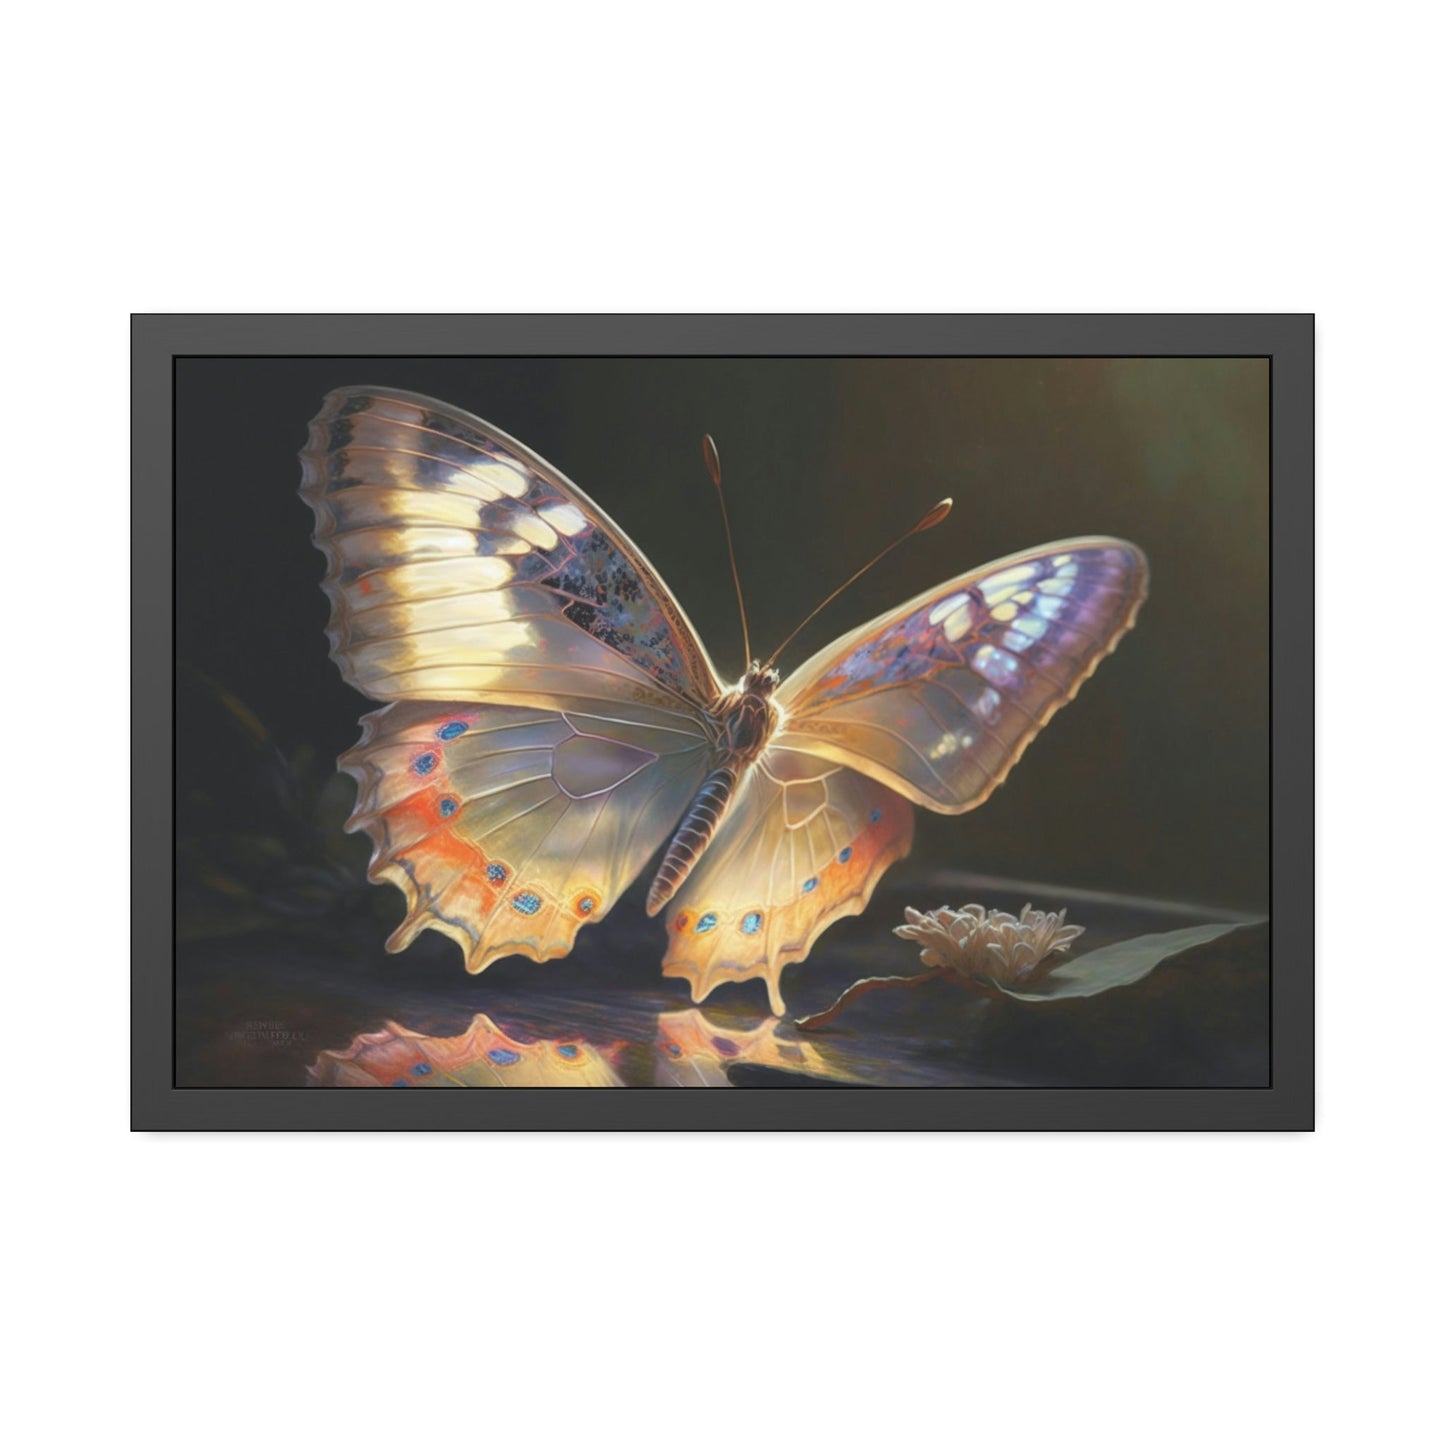 Butterflie in Flight: Art Print on Canvas & Poster of Graceful Winged Creatures